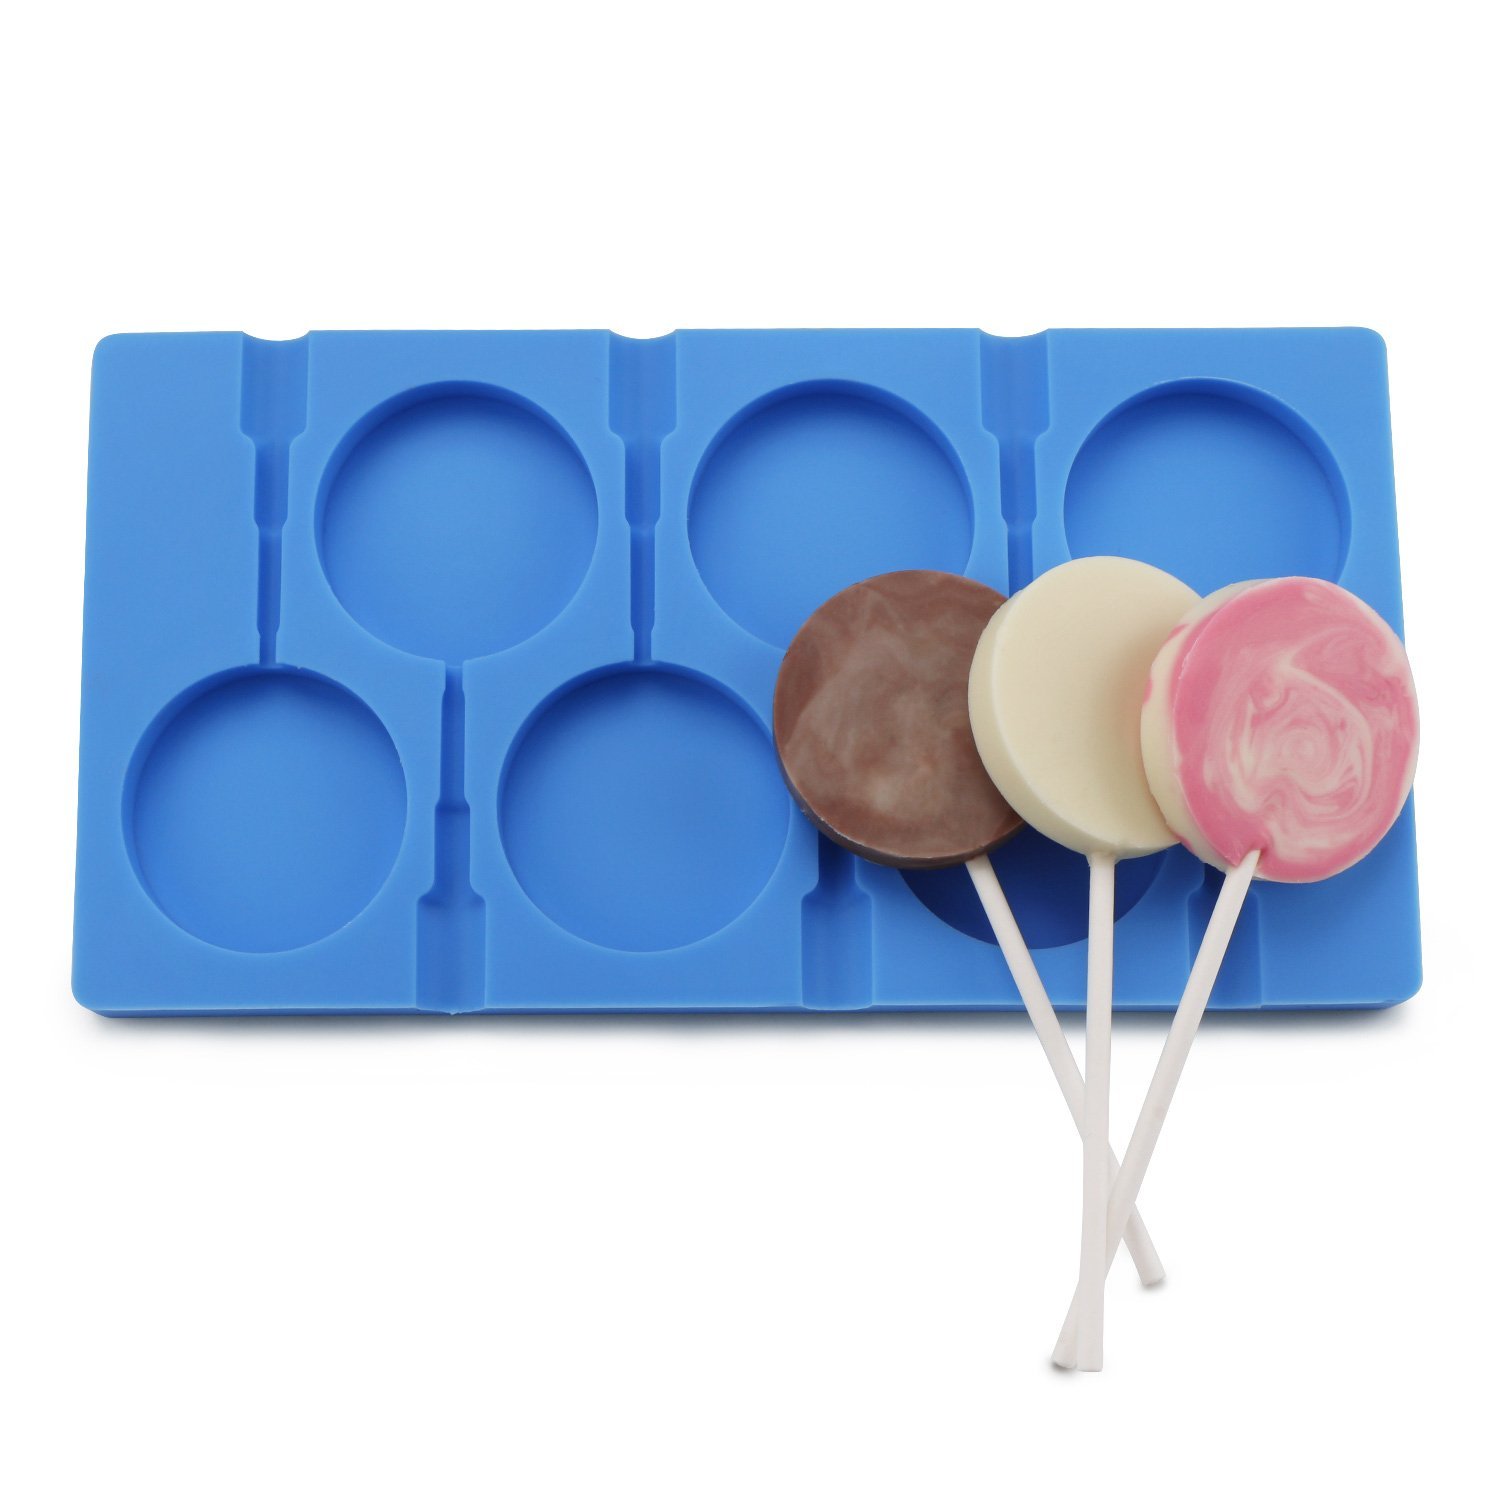 Silicone Lollipop Molds,Sucker Molds,Round Chocolate Lollipops Hard Candy  Molds with 20 Lollipop Sucker Sticks for Making Lollipop,Hard Candy,Ice